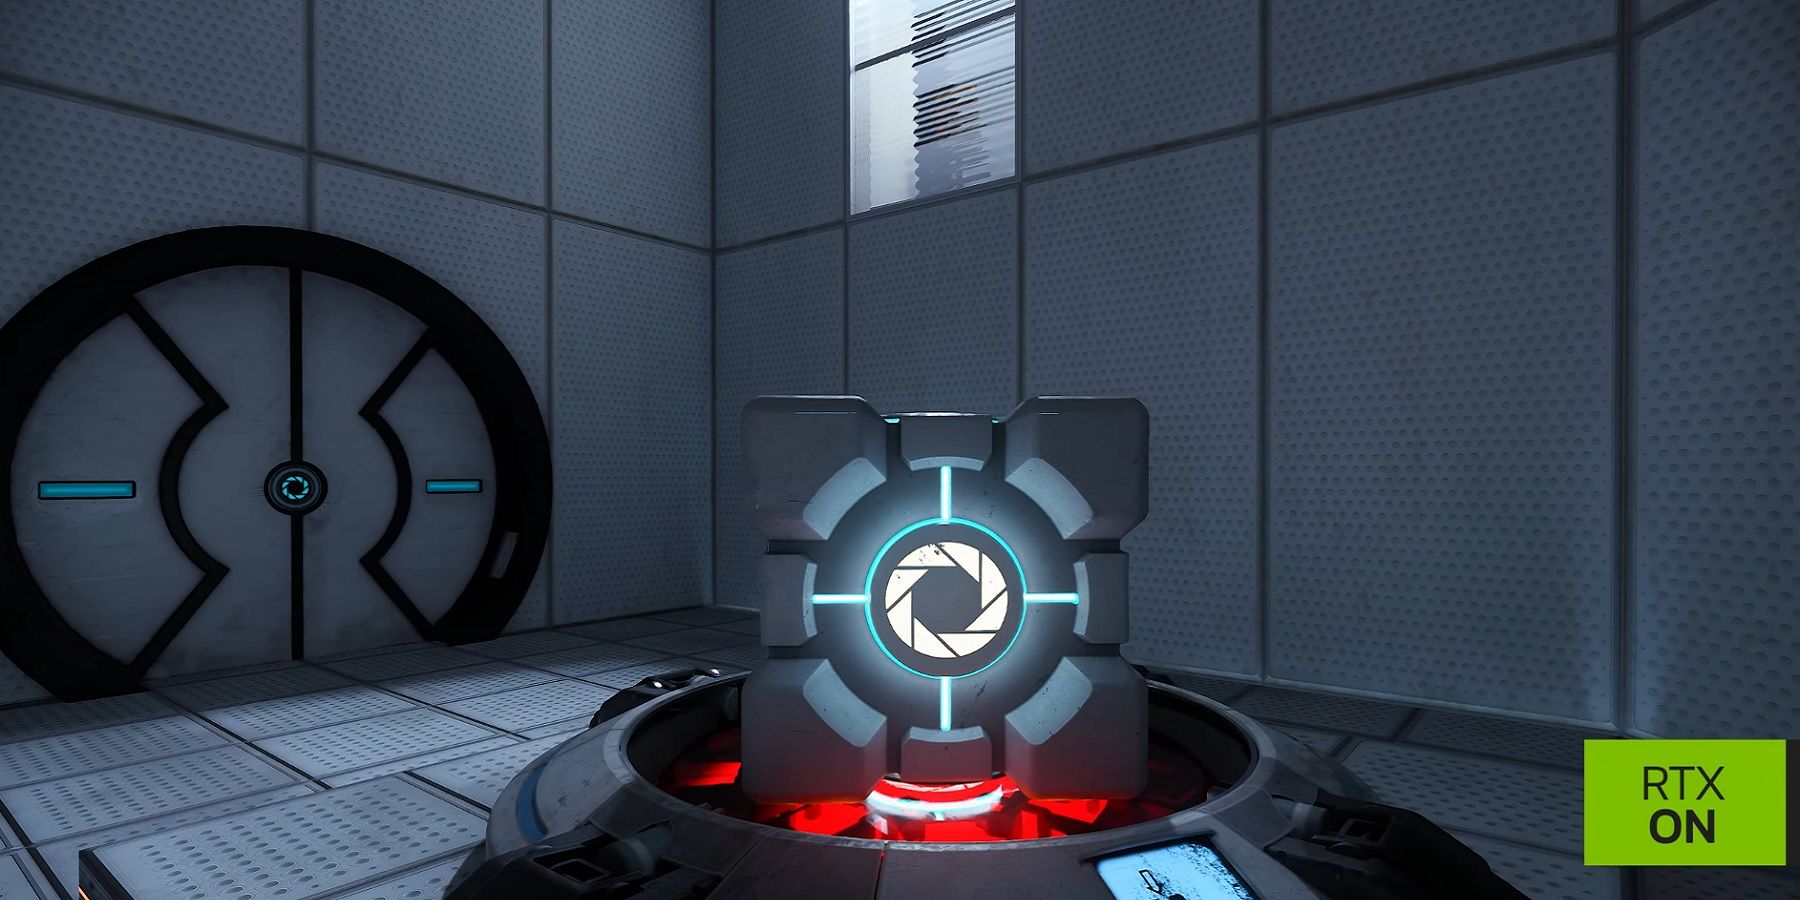 Image from the RTX build of Portal showing a cube on a a button.